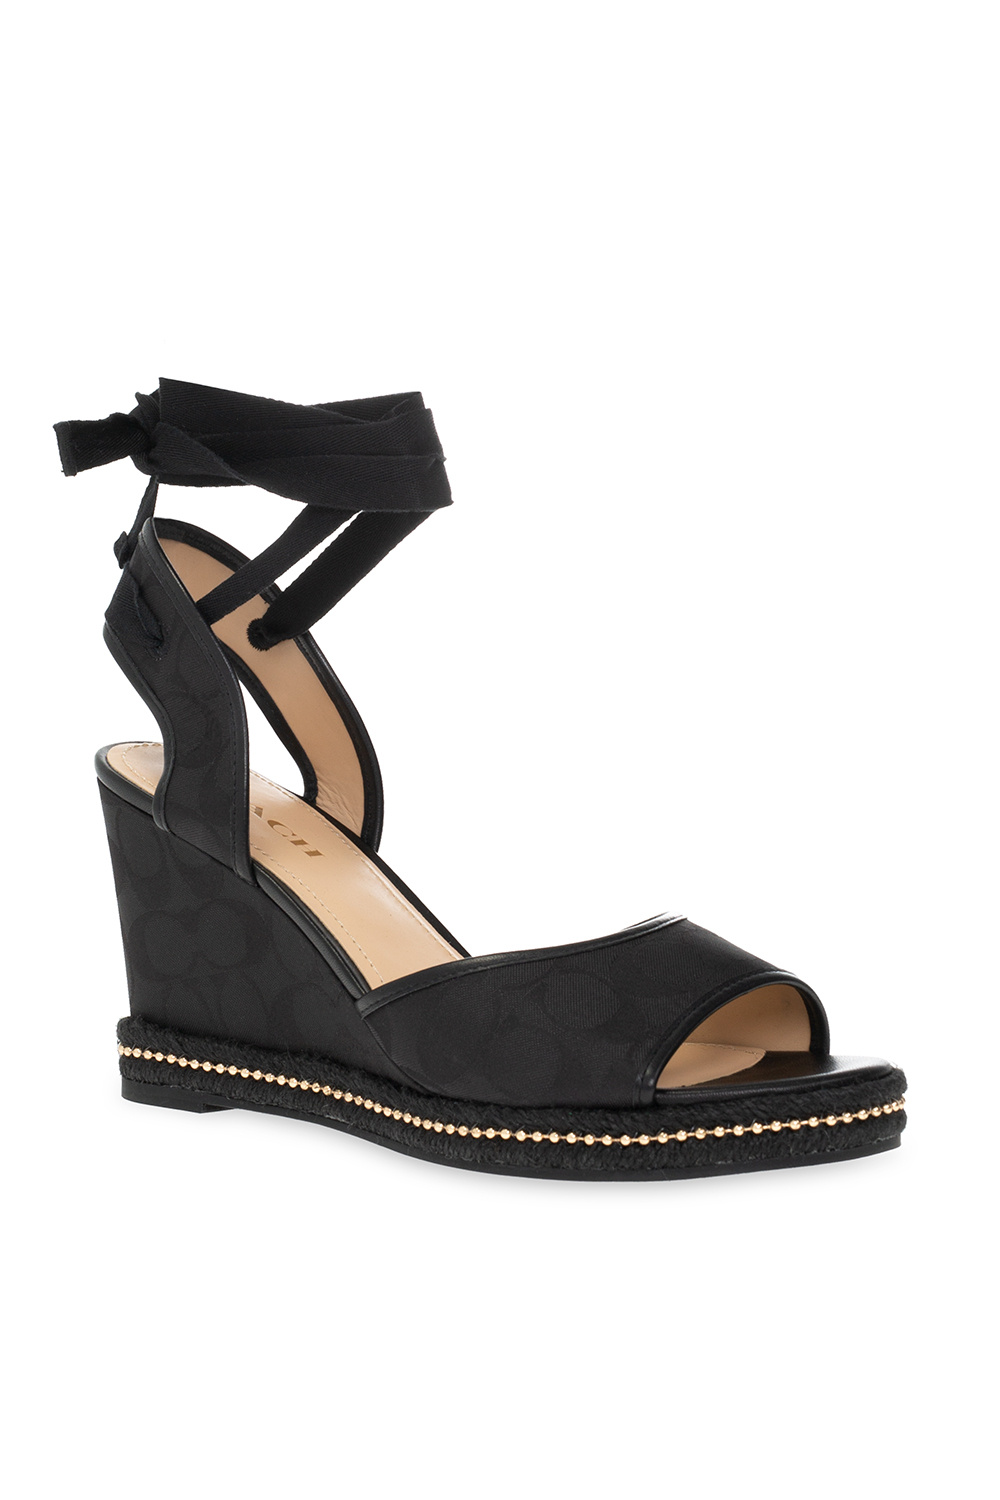 Coach ‘Page’ wedge sandals